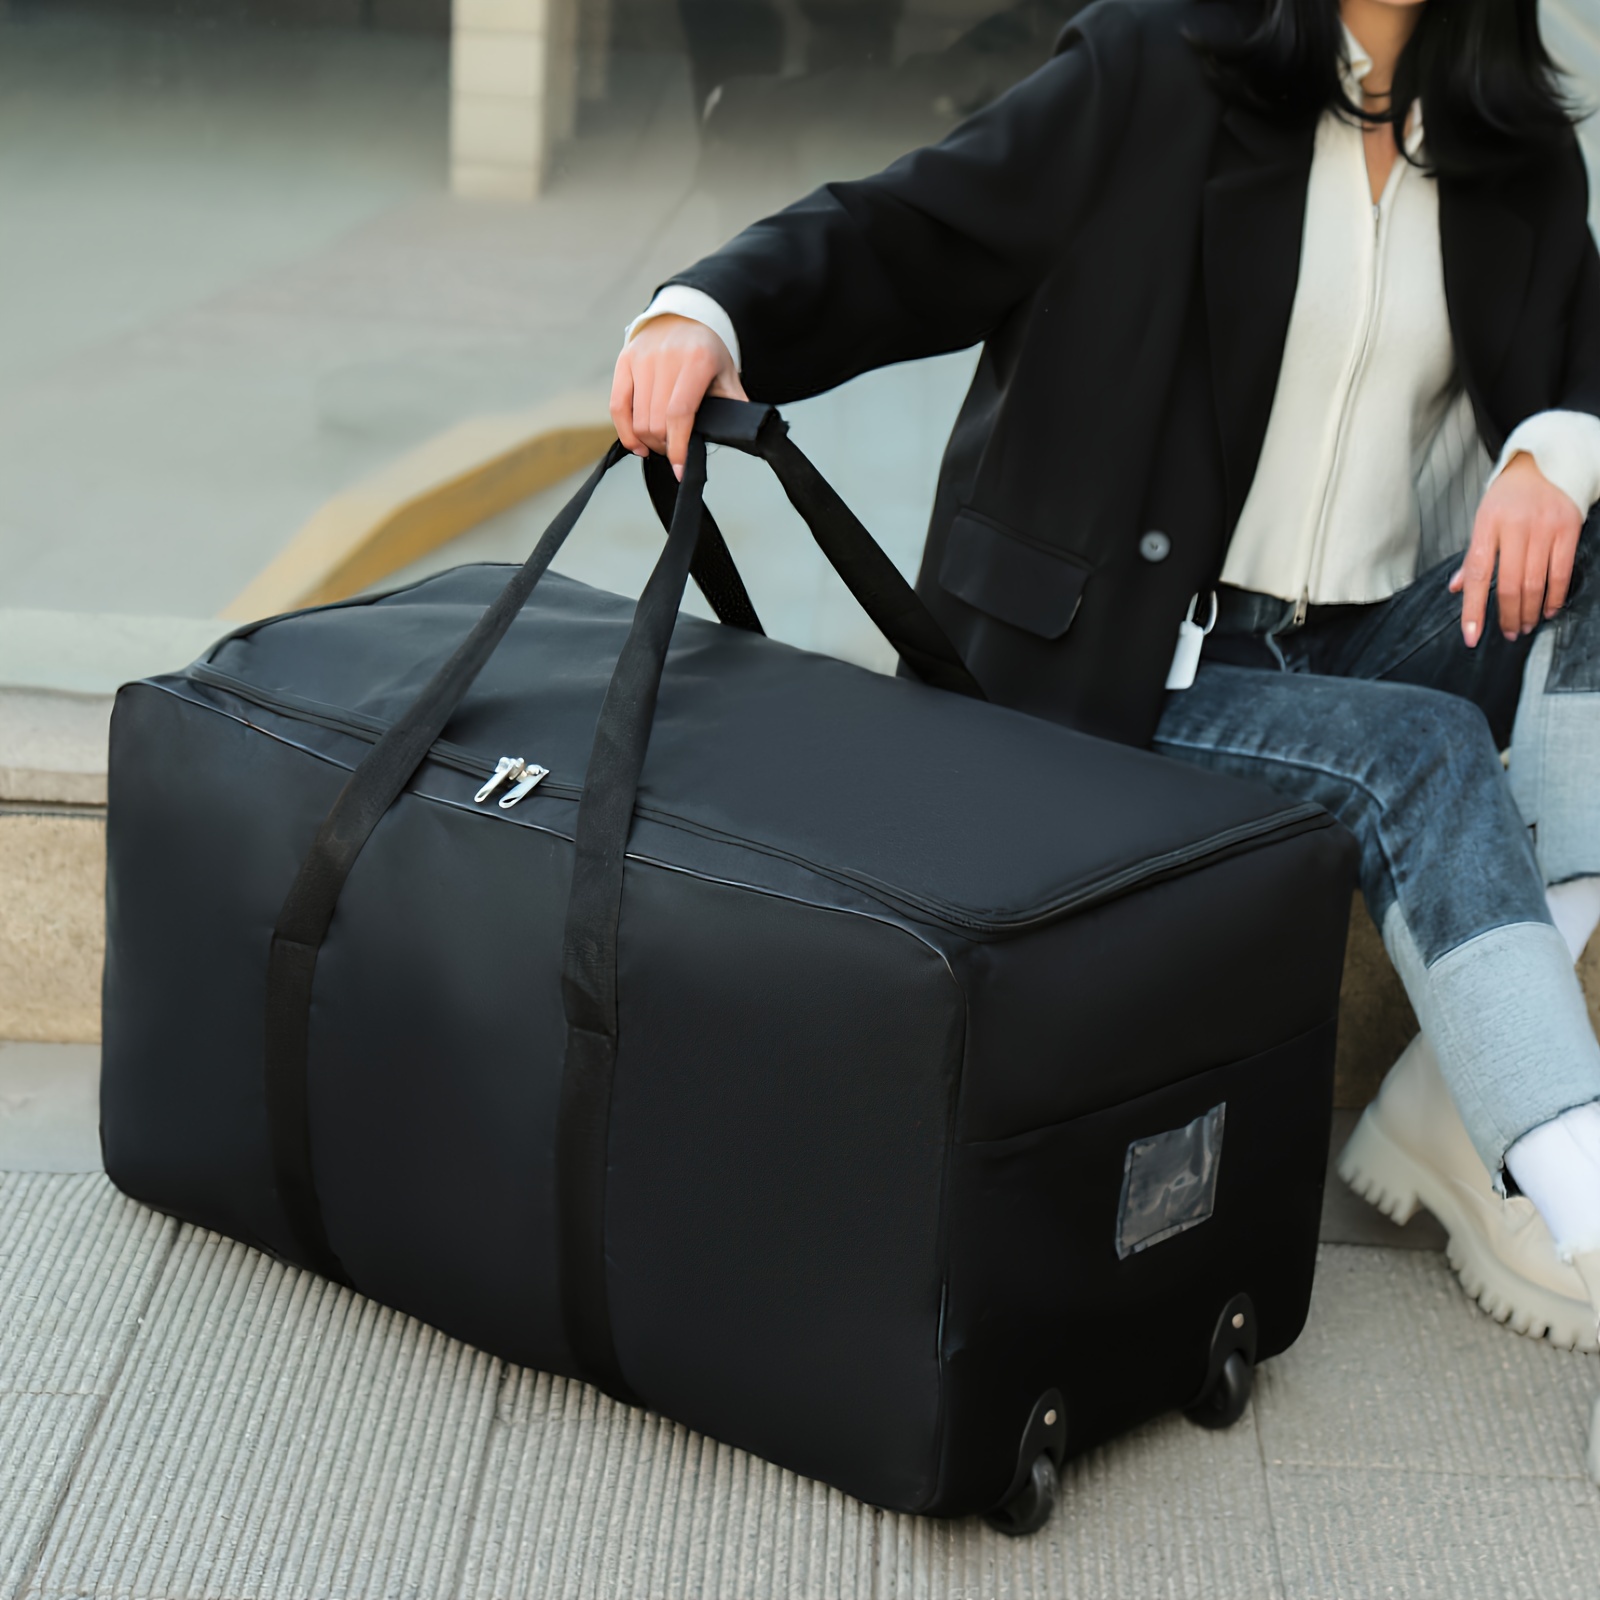 

Extra Large Capacity, Black Minimalist Quilts Storage Organizer Bag With Wheels, Foldable Rolling Luggage Bag For Travel